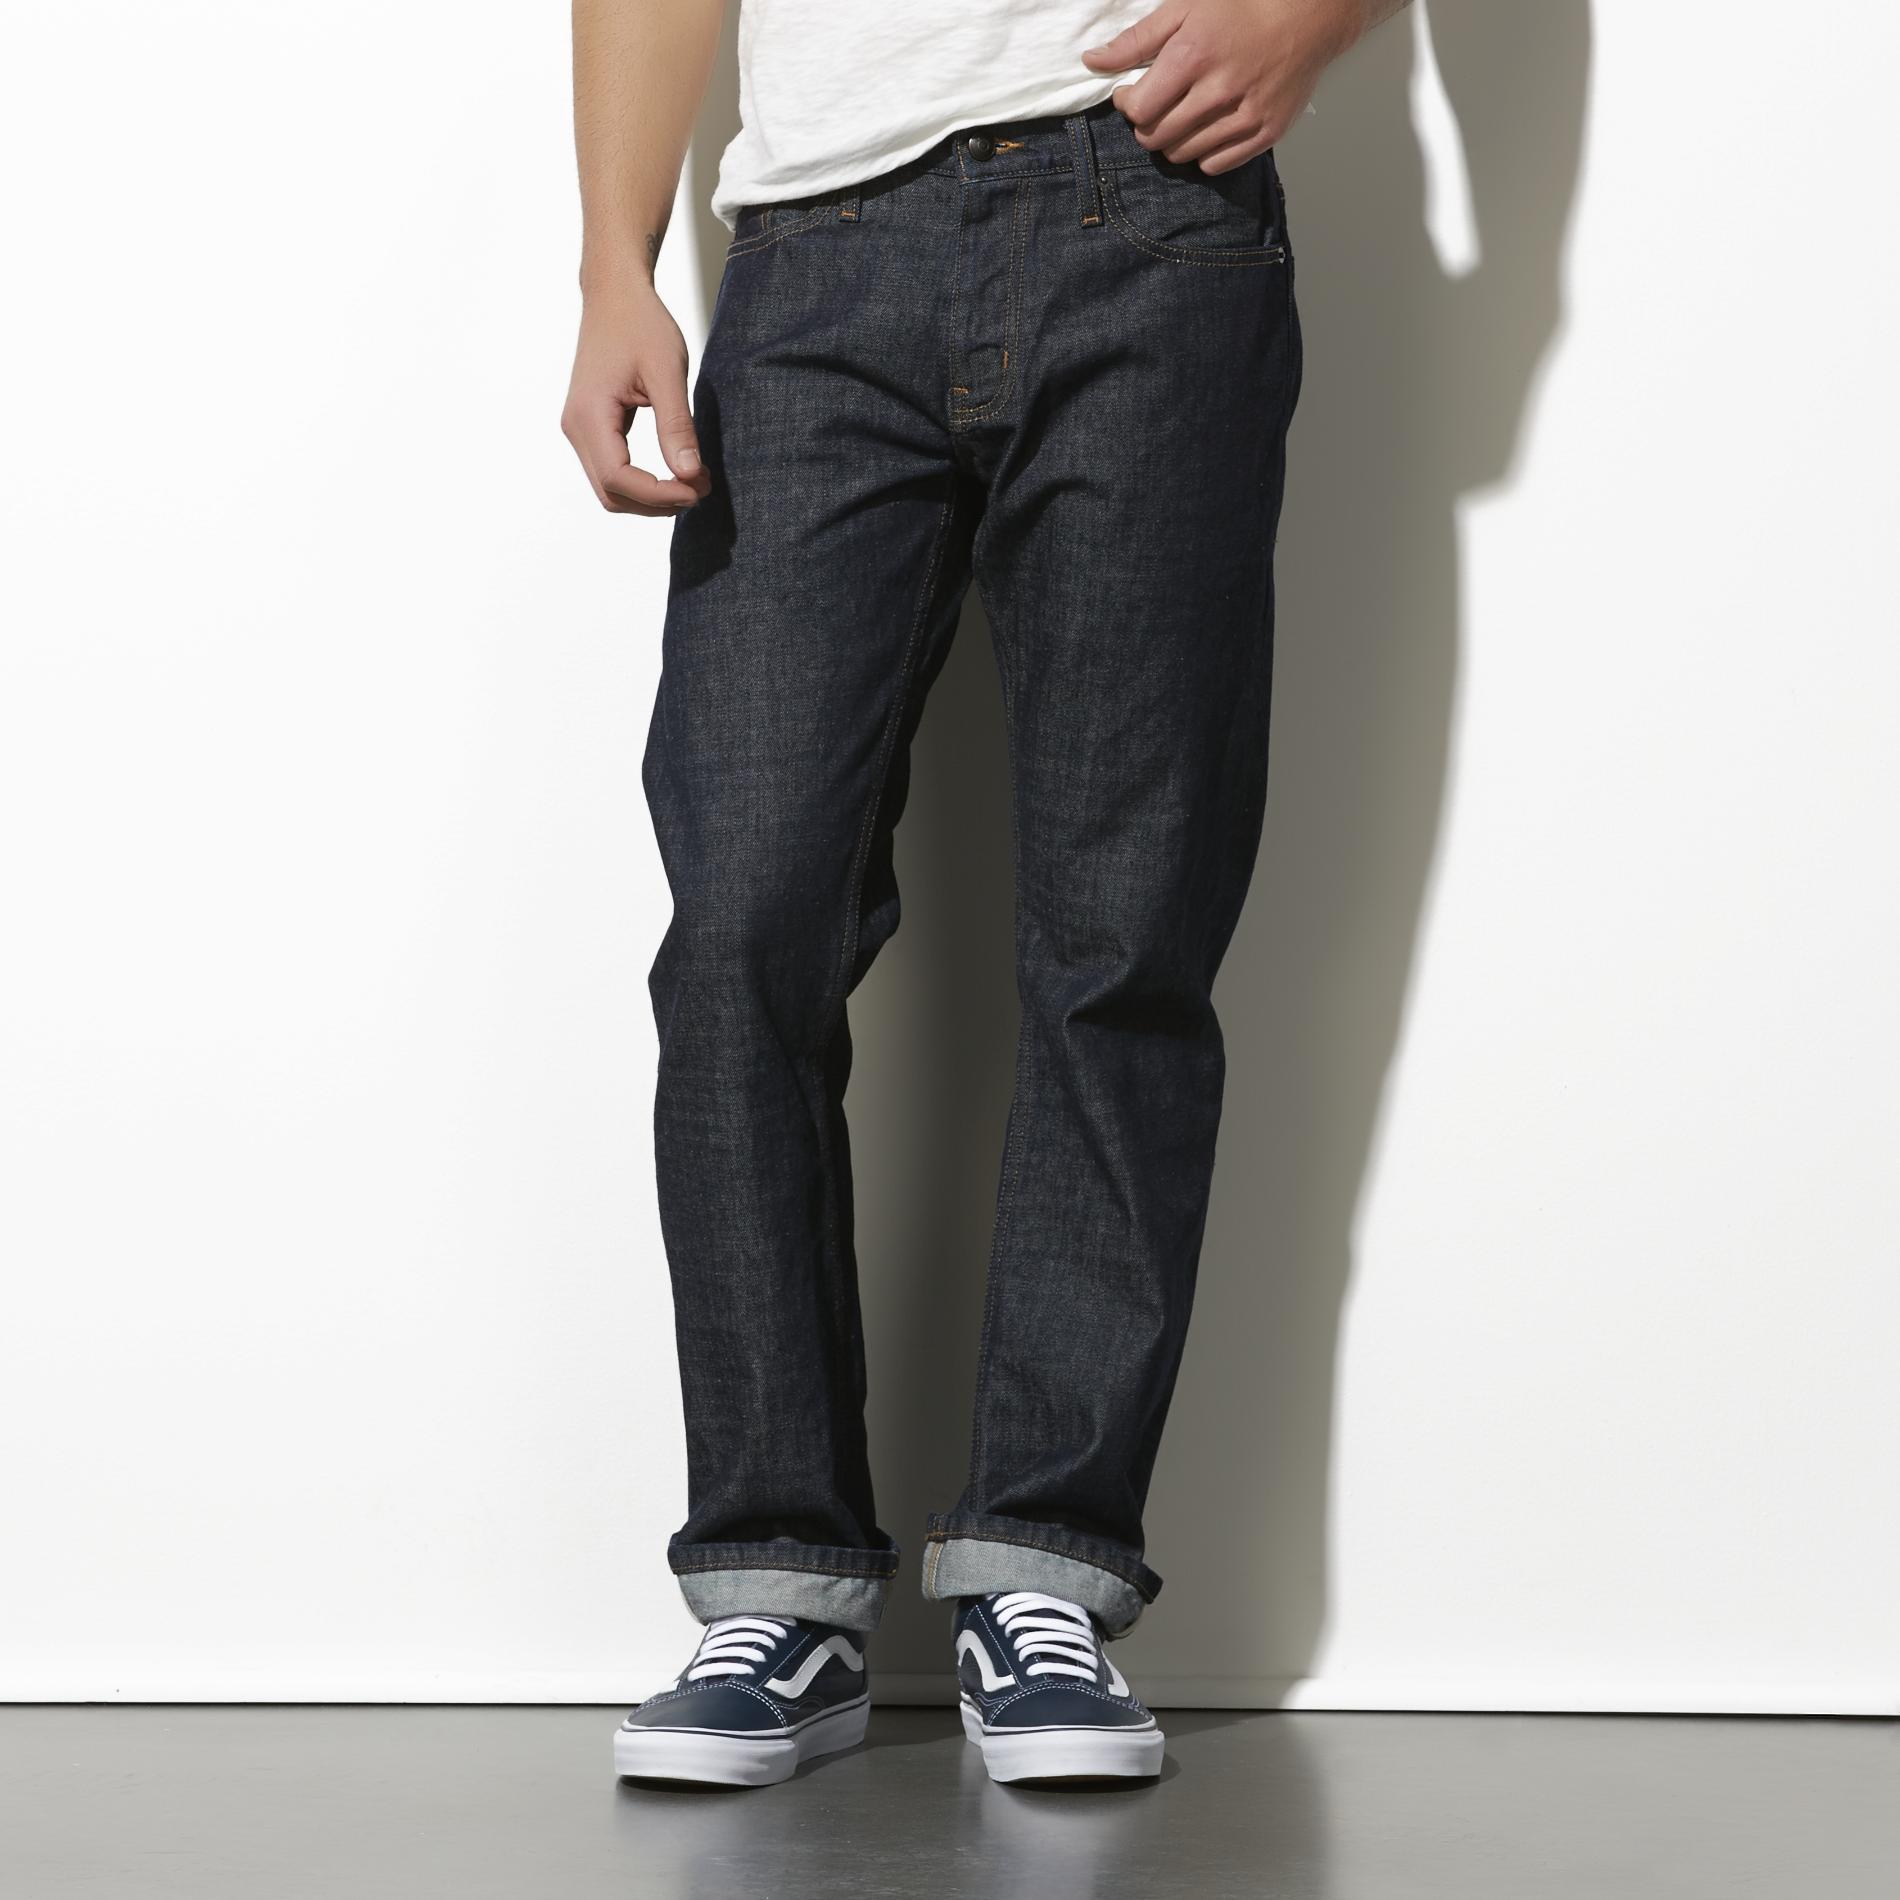 Men’s Adam Levine Jeans on Clearance From $12.99!